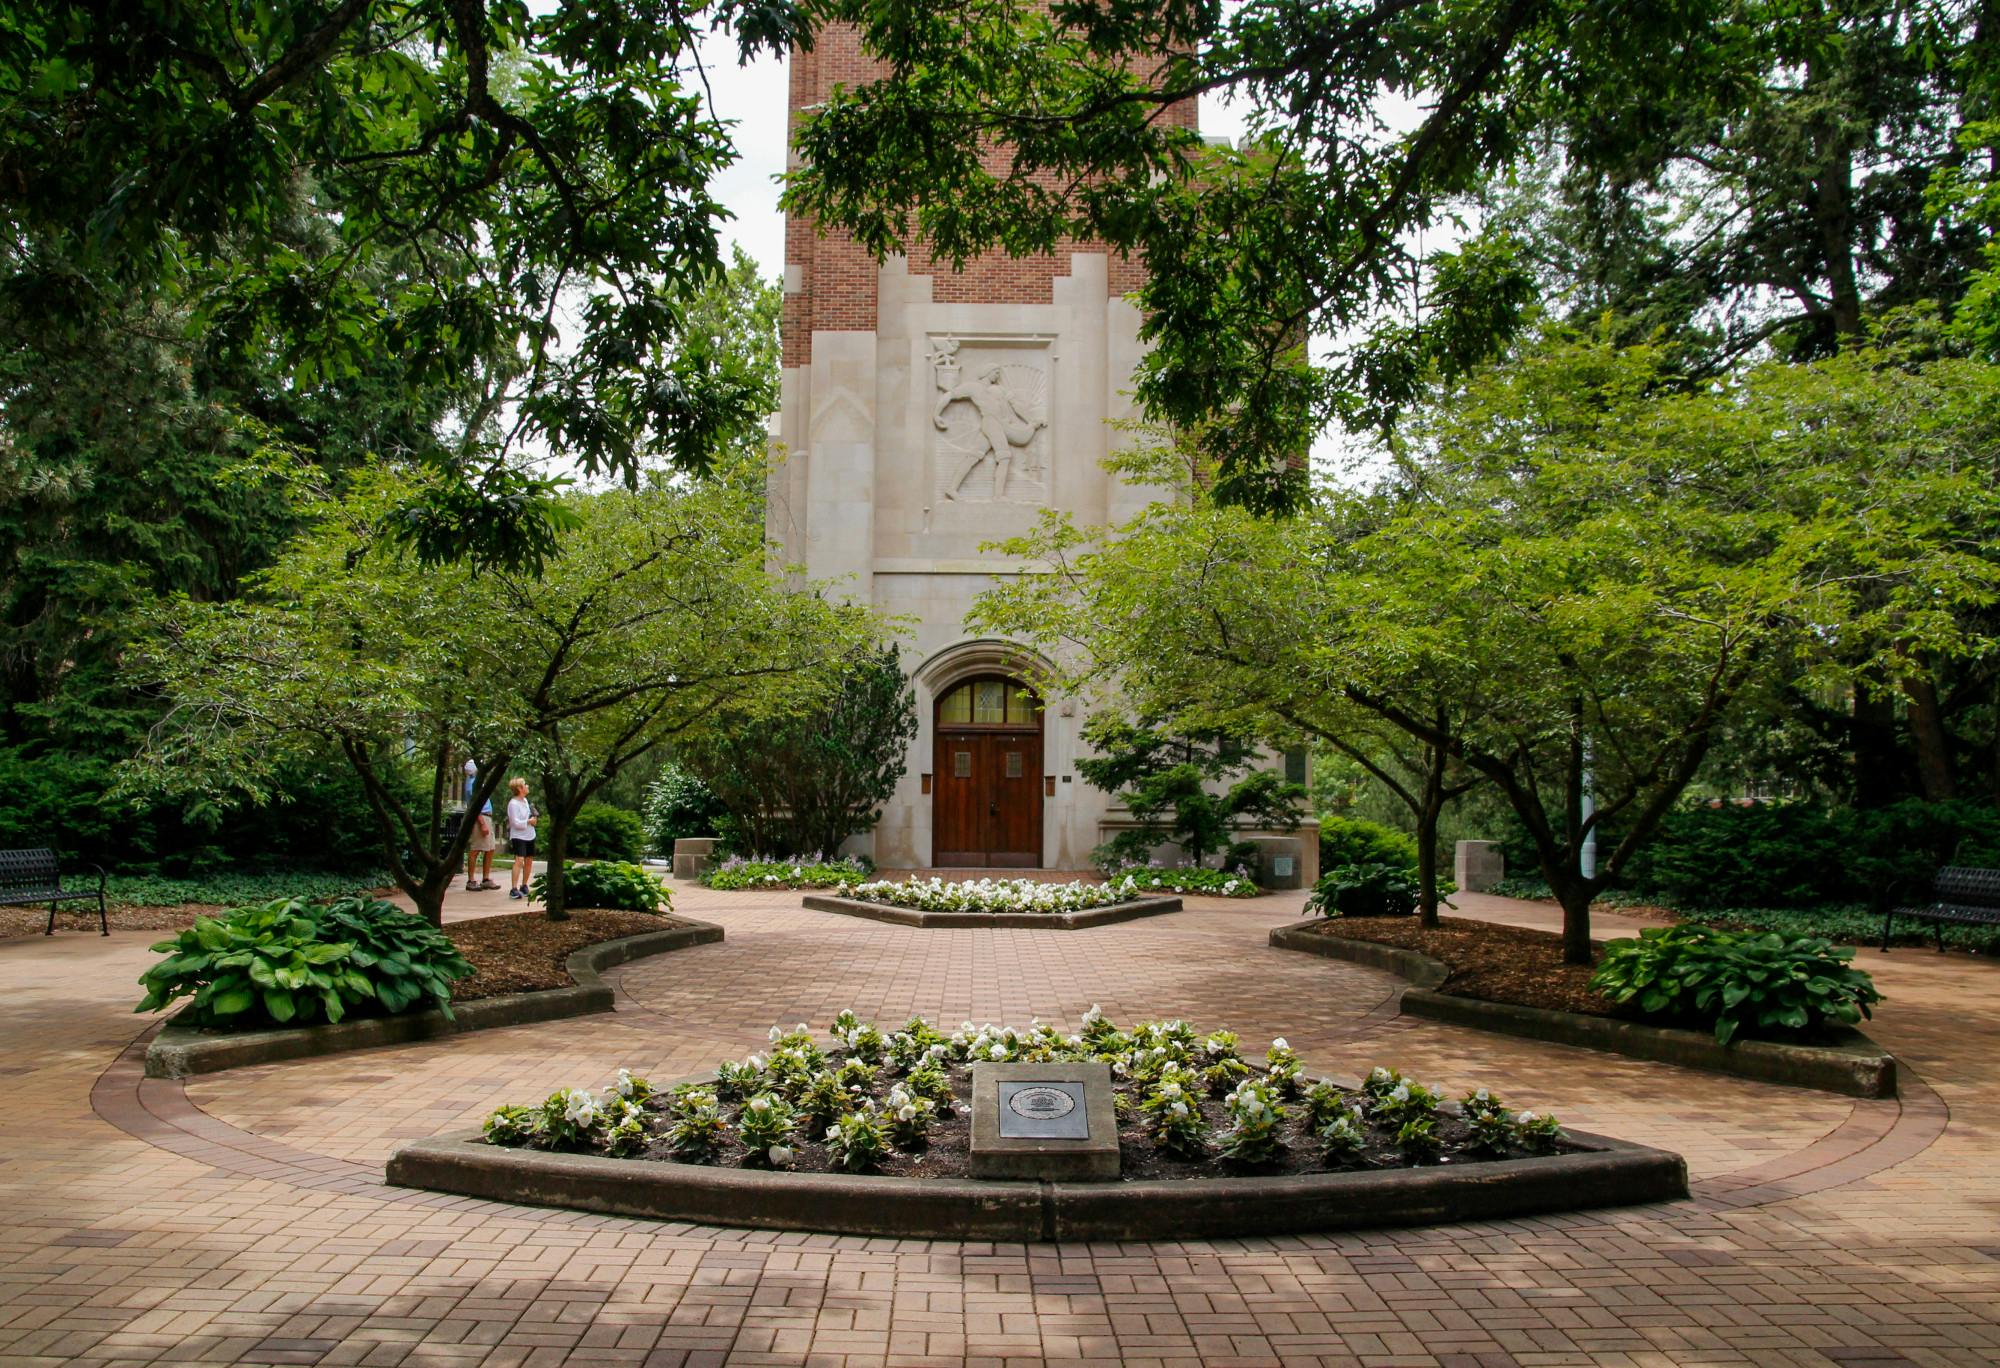 <p>The Beaumont Tower courtyard serves as another place to enjoy the greenery and aesthetics of campus while you study, meet with family and friends, or just take a break from the hustle and bustle of campus life.&nbsp;</p>